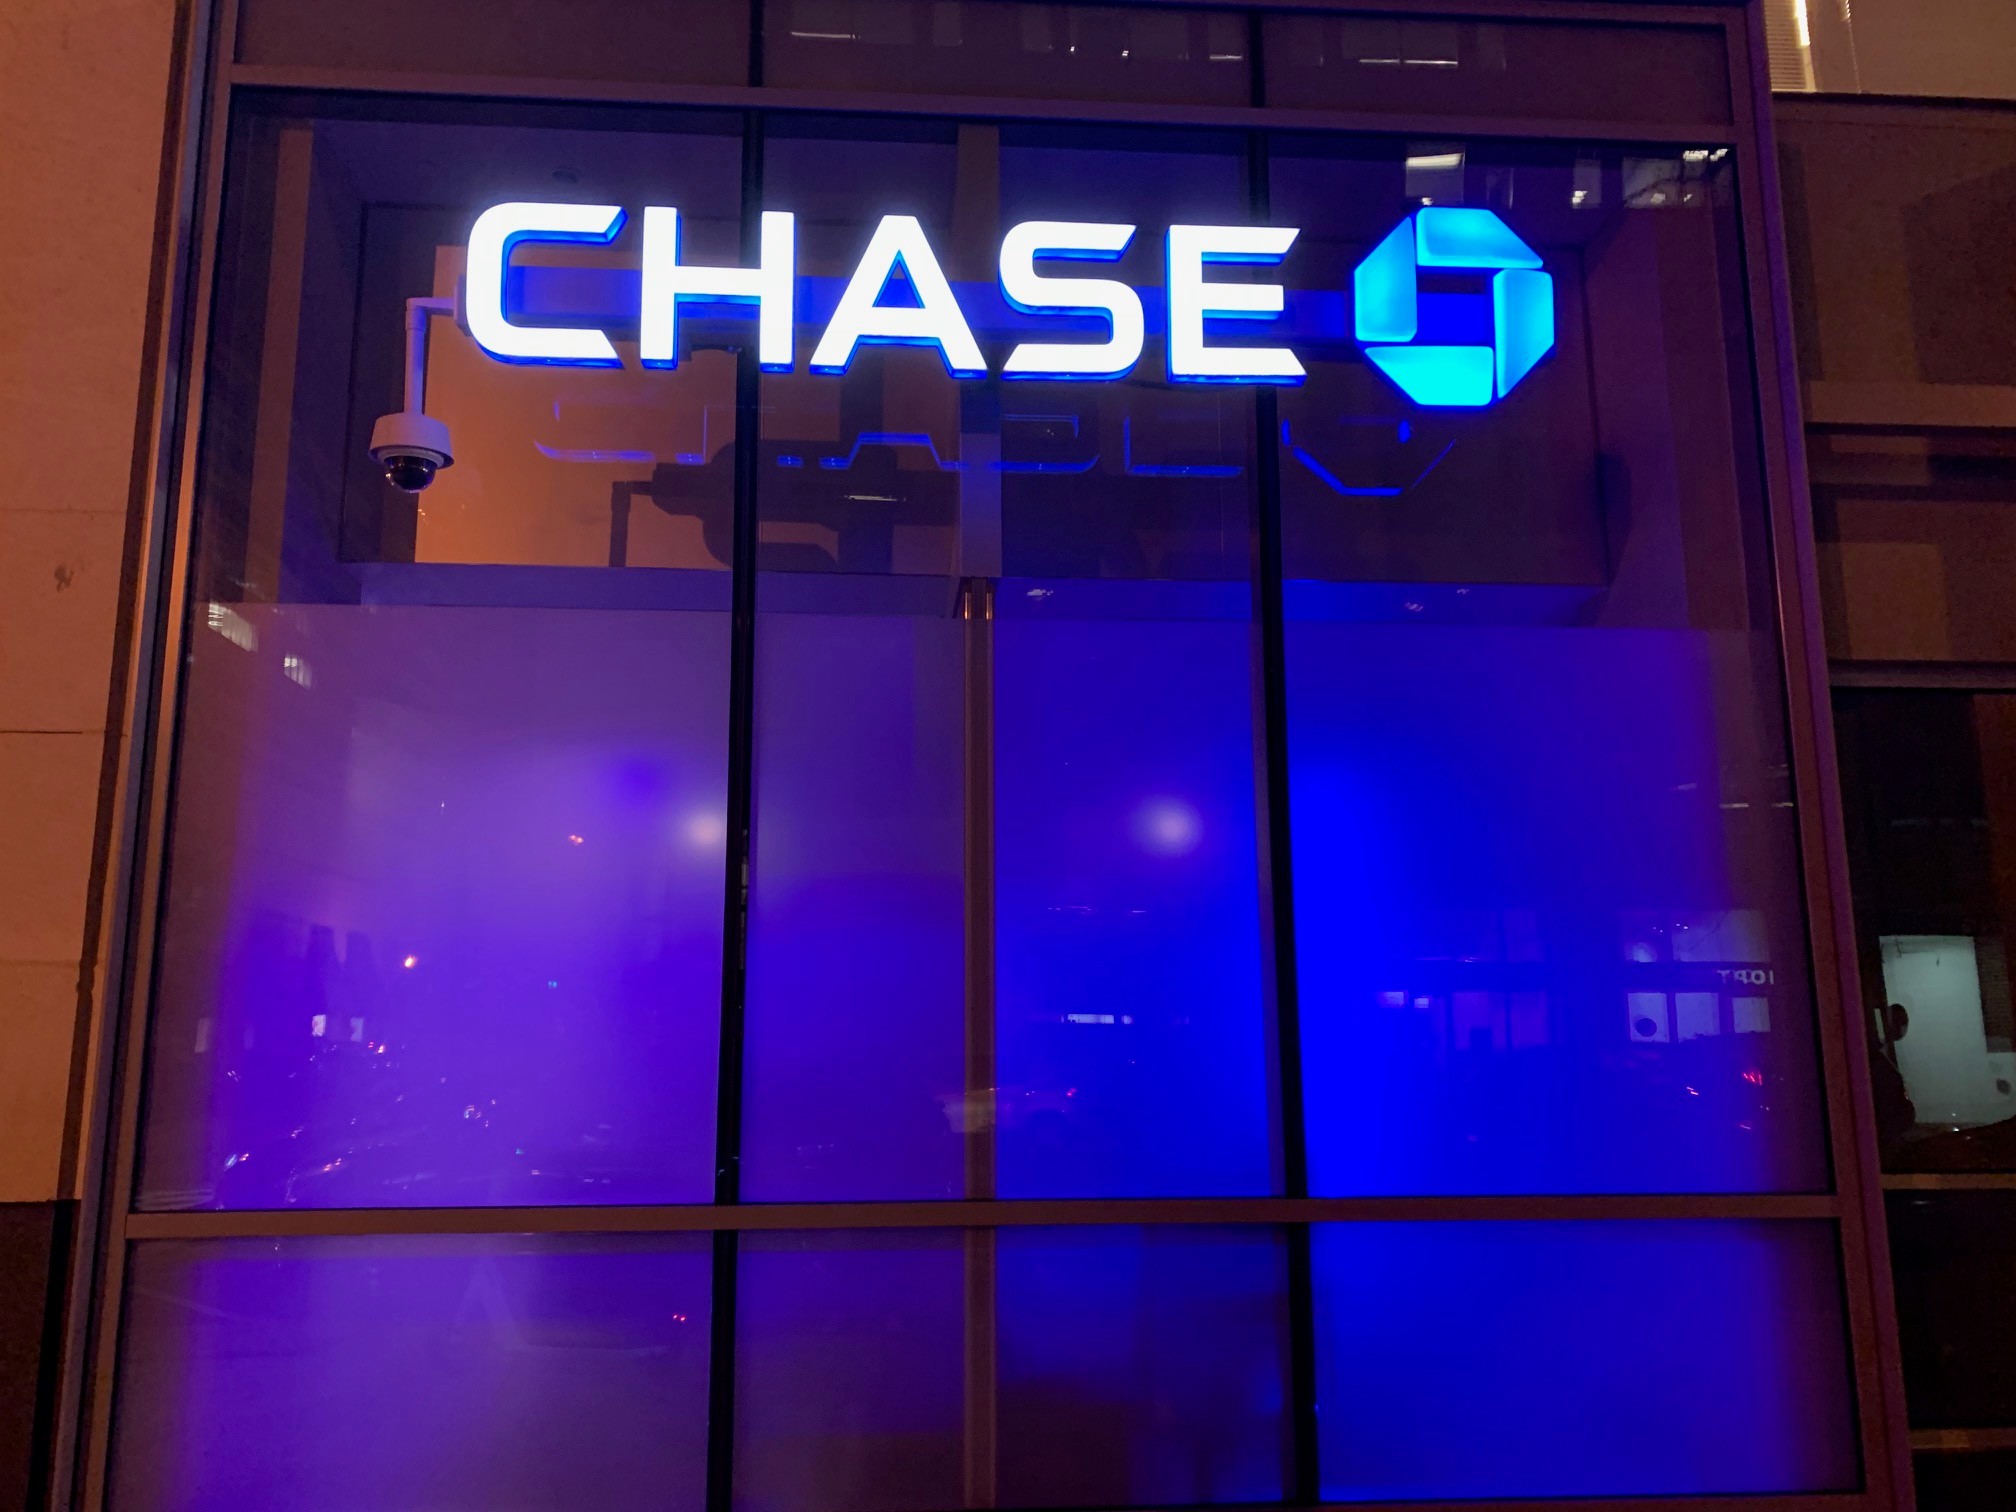 Chase Devalues 'Pay Yourself Back' 